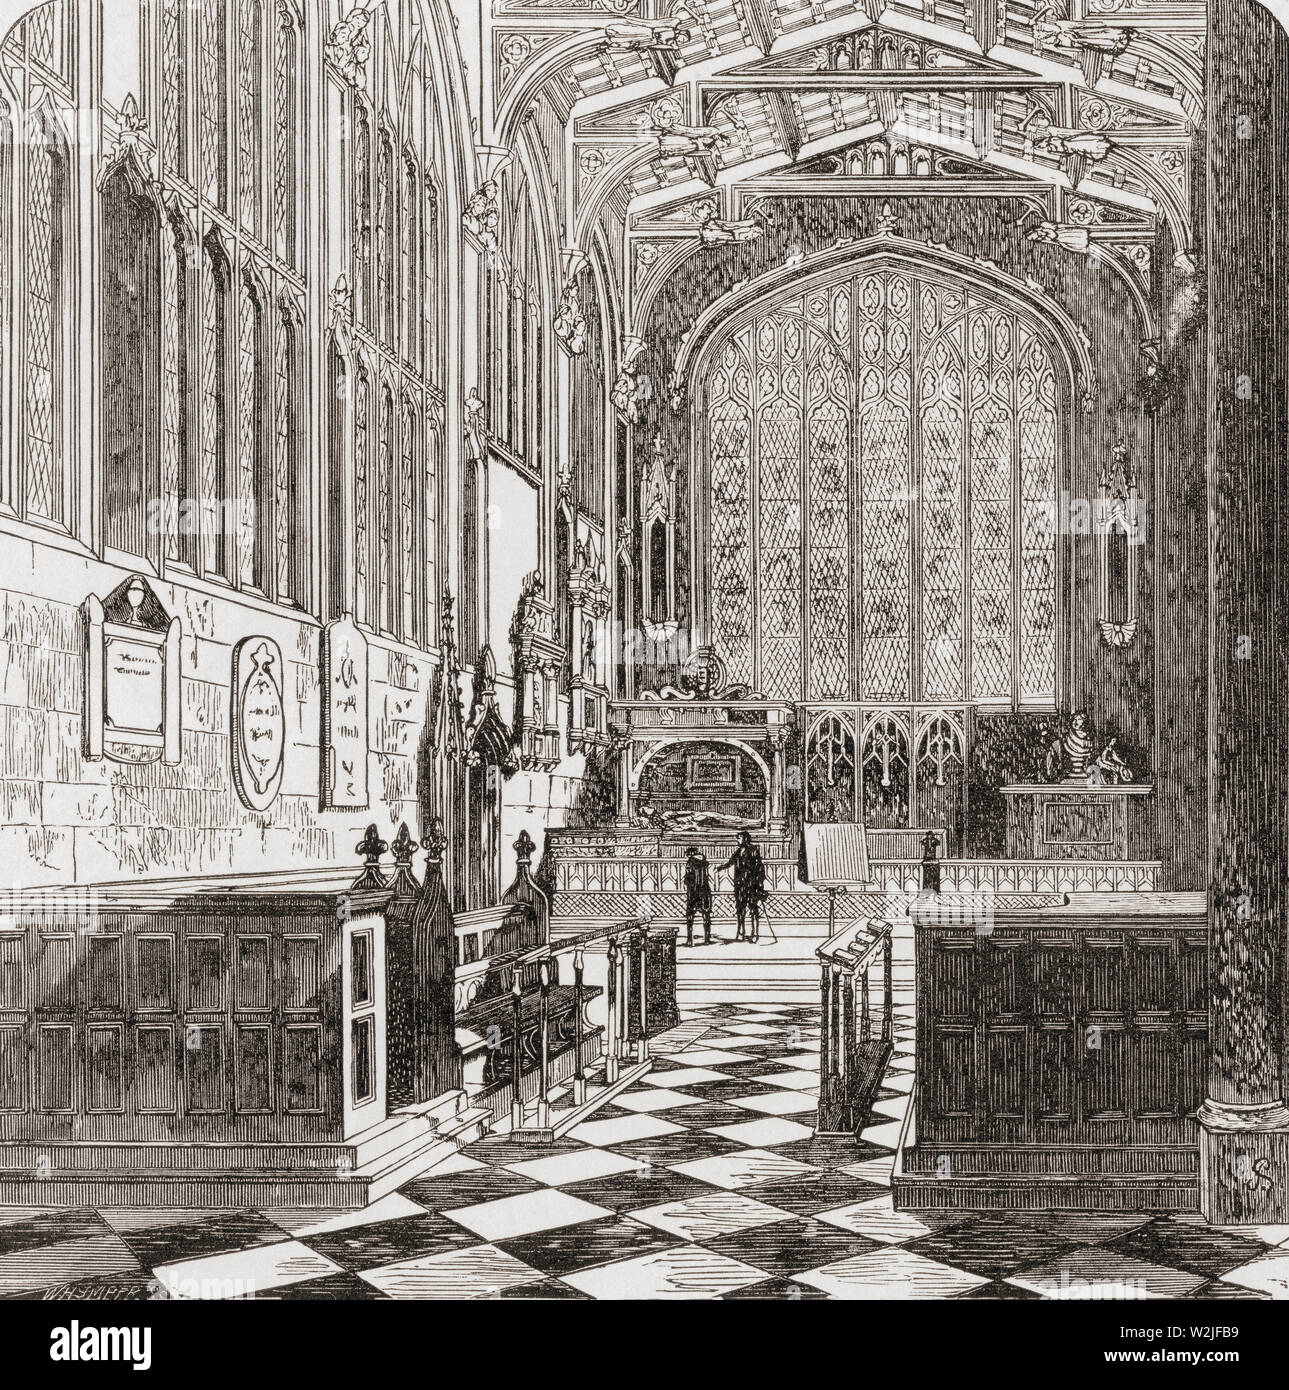 The Collegiate Church of the Holy and Undivided Trinity, Stratford-upon-Avon, England. The interior and tomb of William Shakespeare, seen here in the 19th century.  This church was the place of baptism and burial of William Shakespeare.  From English Pictures, published 1890. Stock Photo